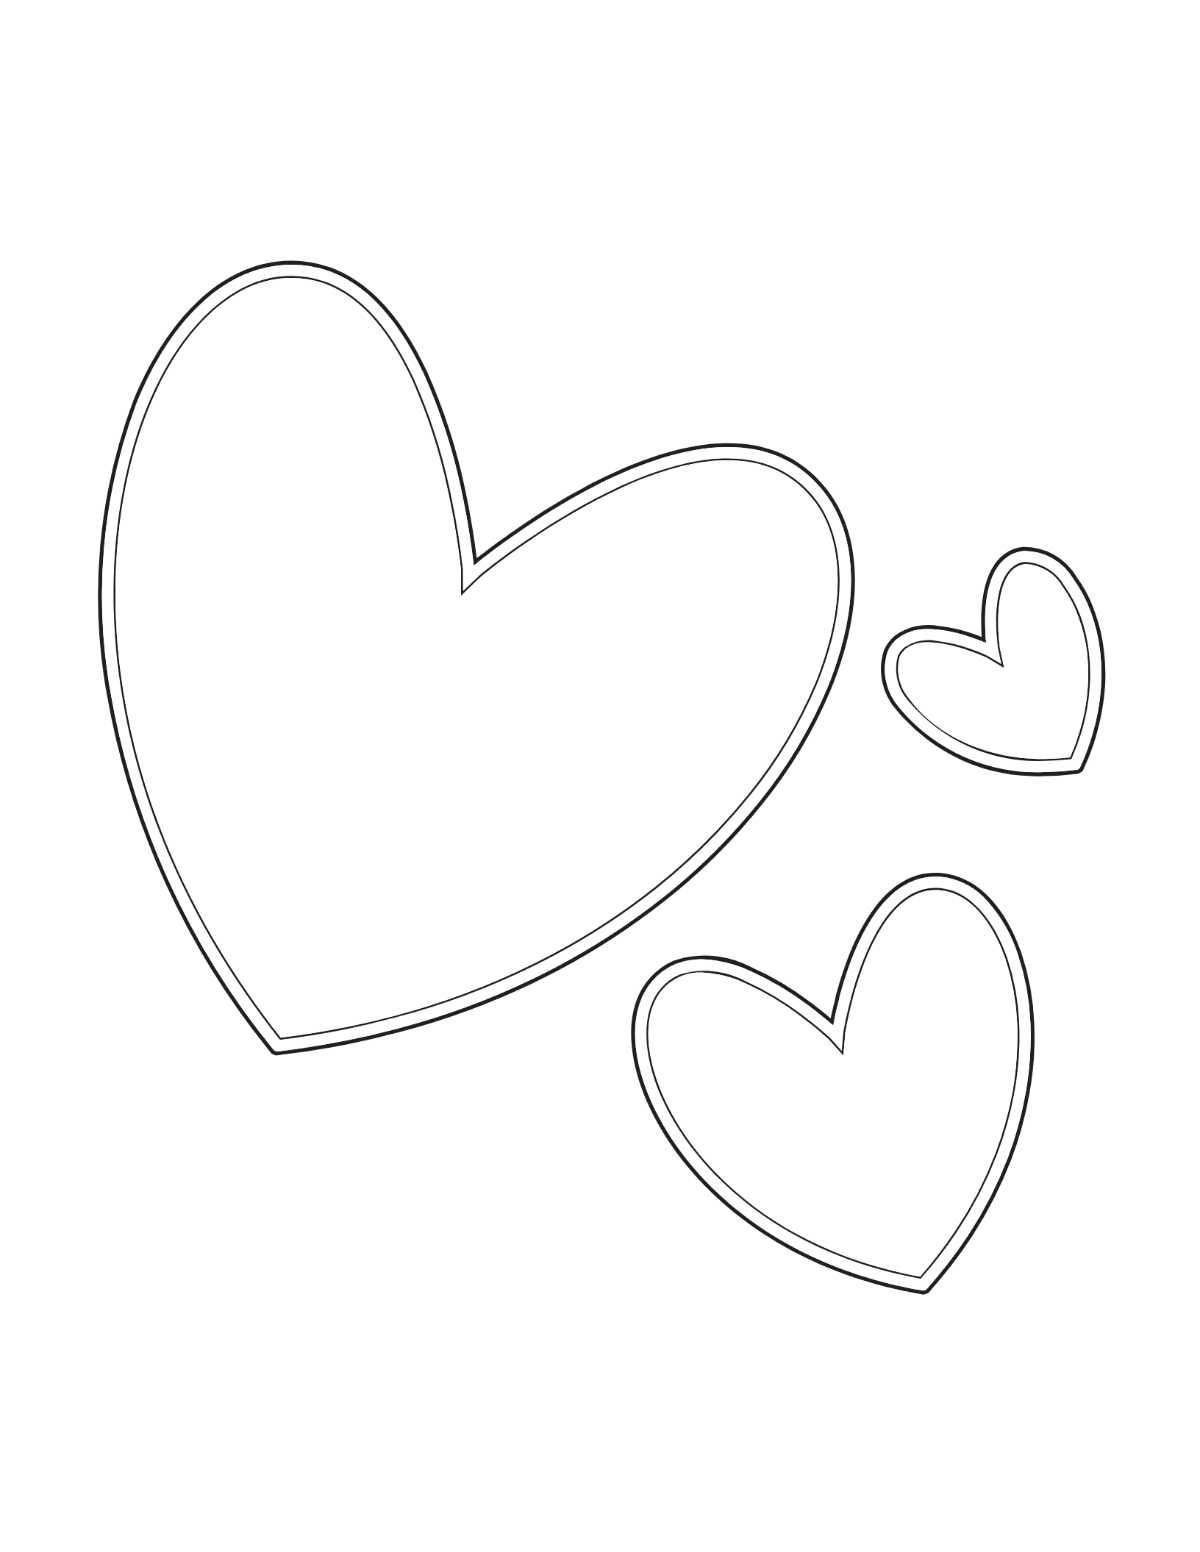 Heart Design Outline Coloring Page Template